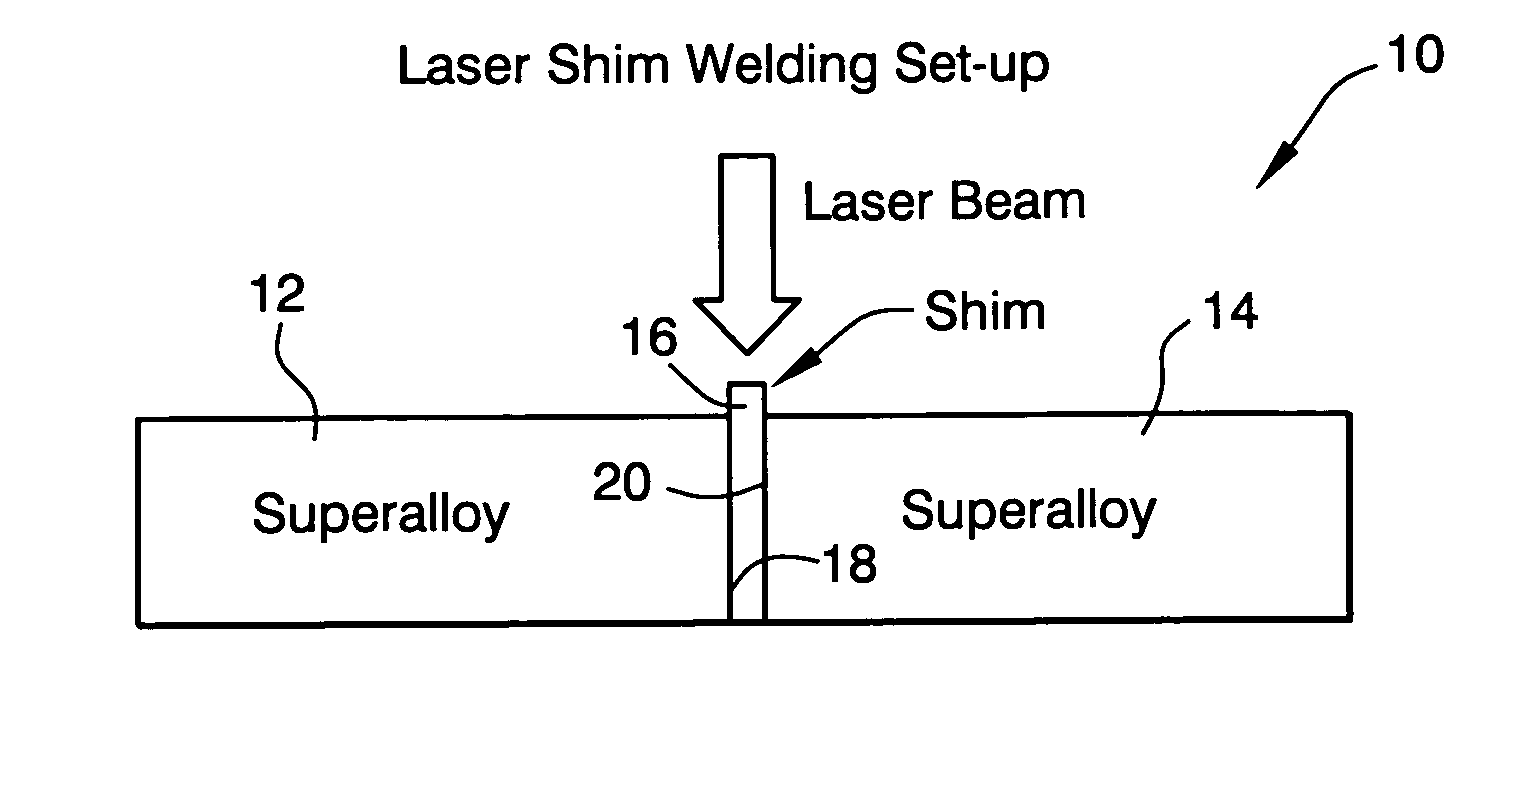 Shimmed laser beam welding process for joining superalloys for gas turbine applications